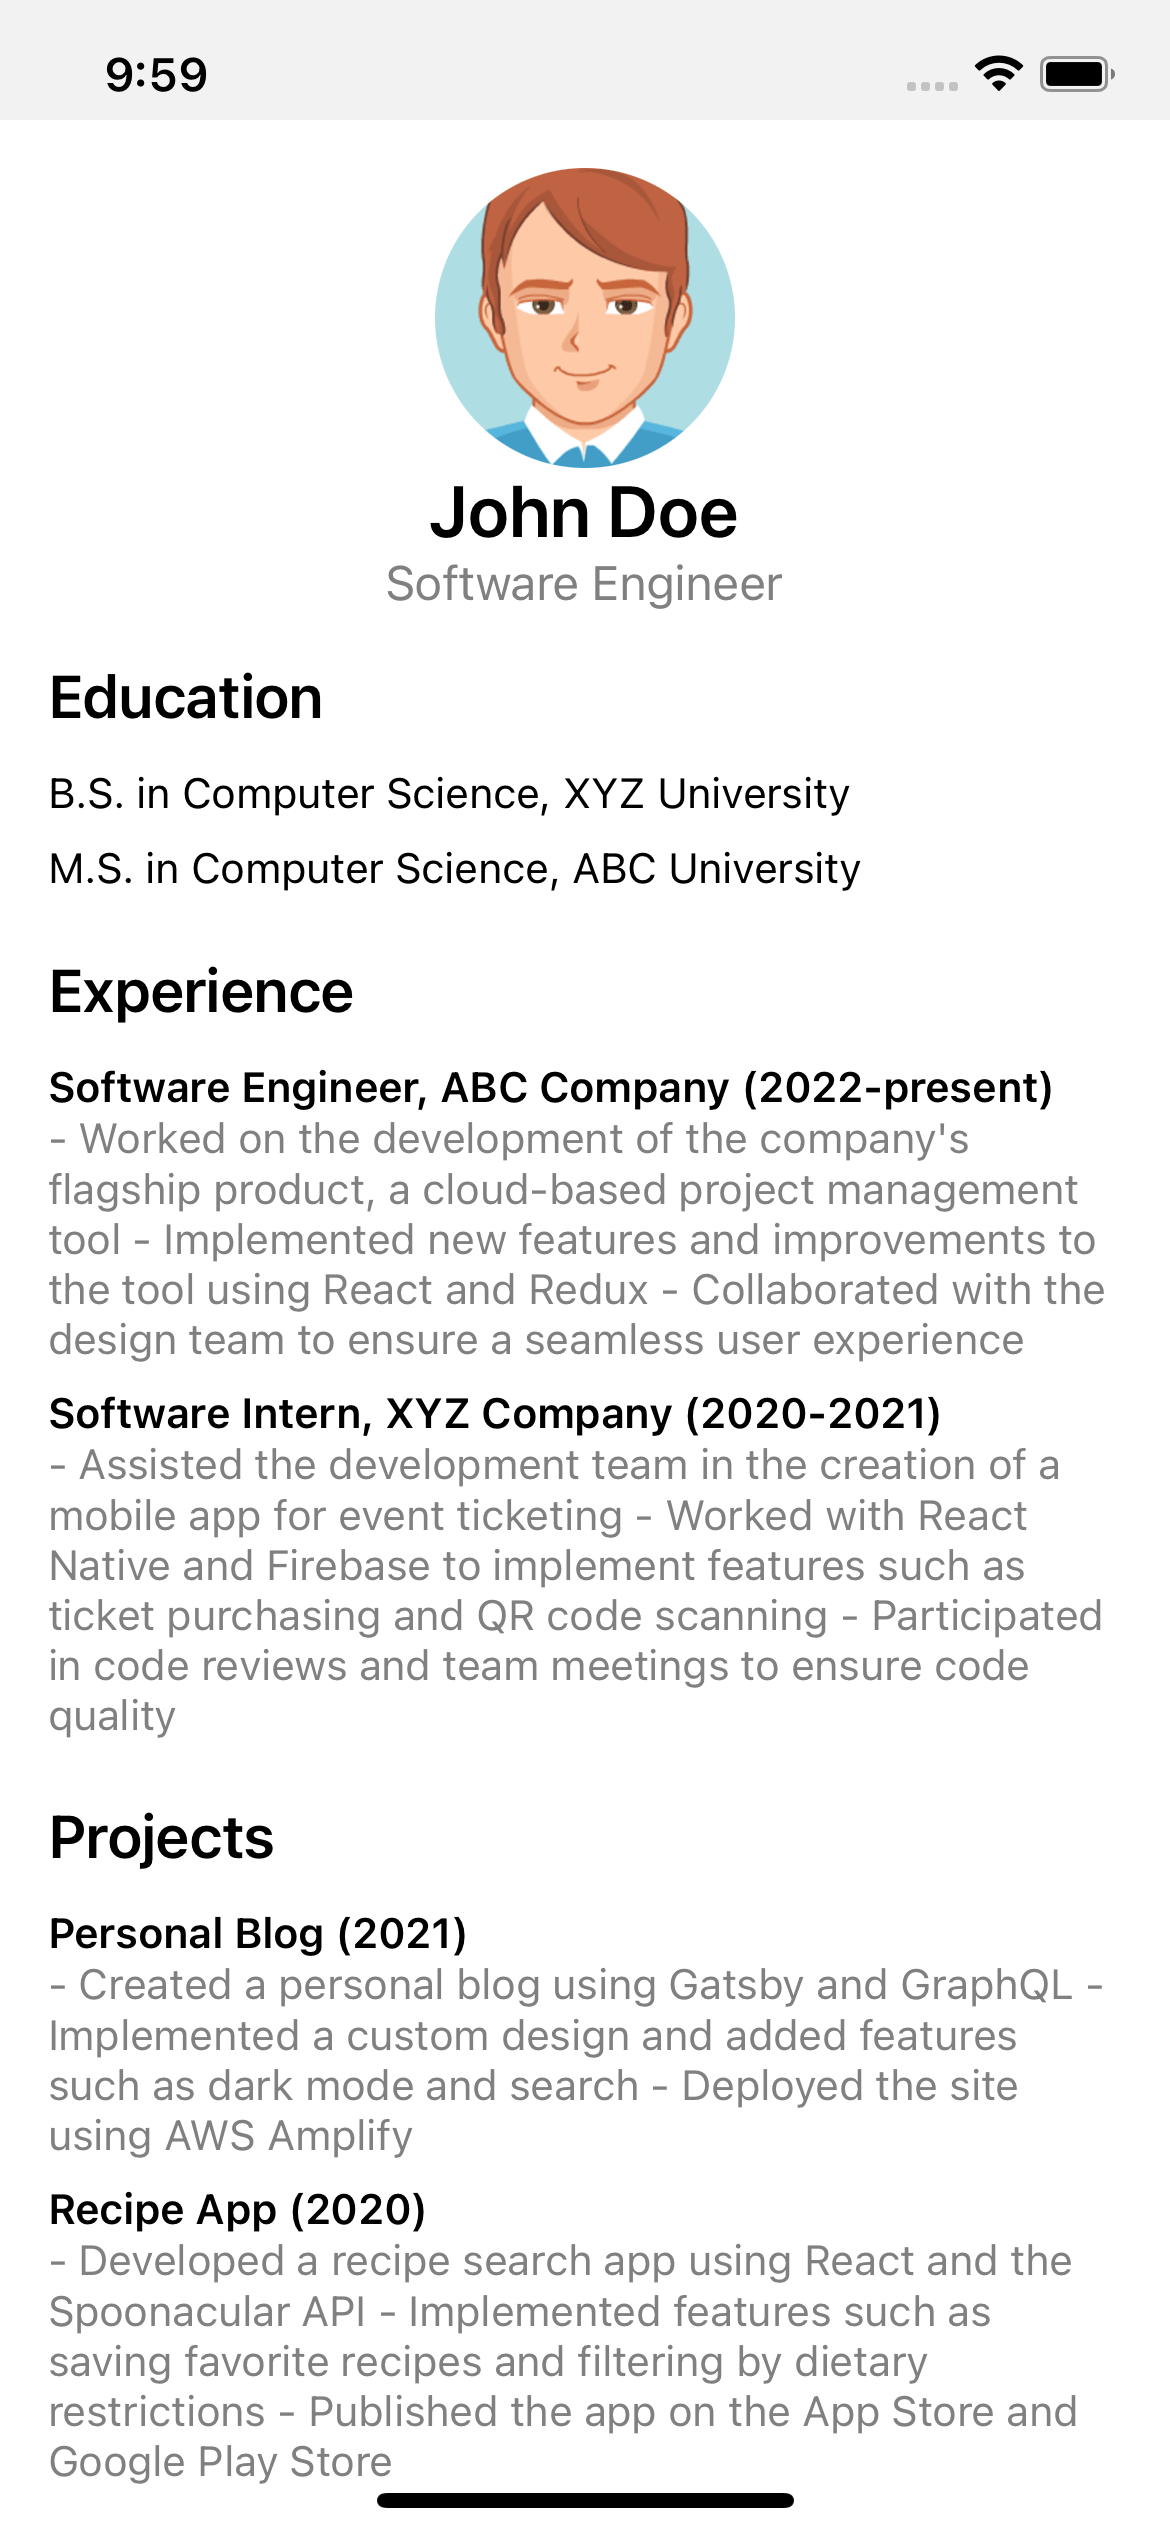 react native UI example. Simple resume view with education experience and project